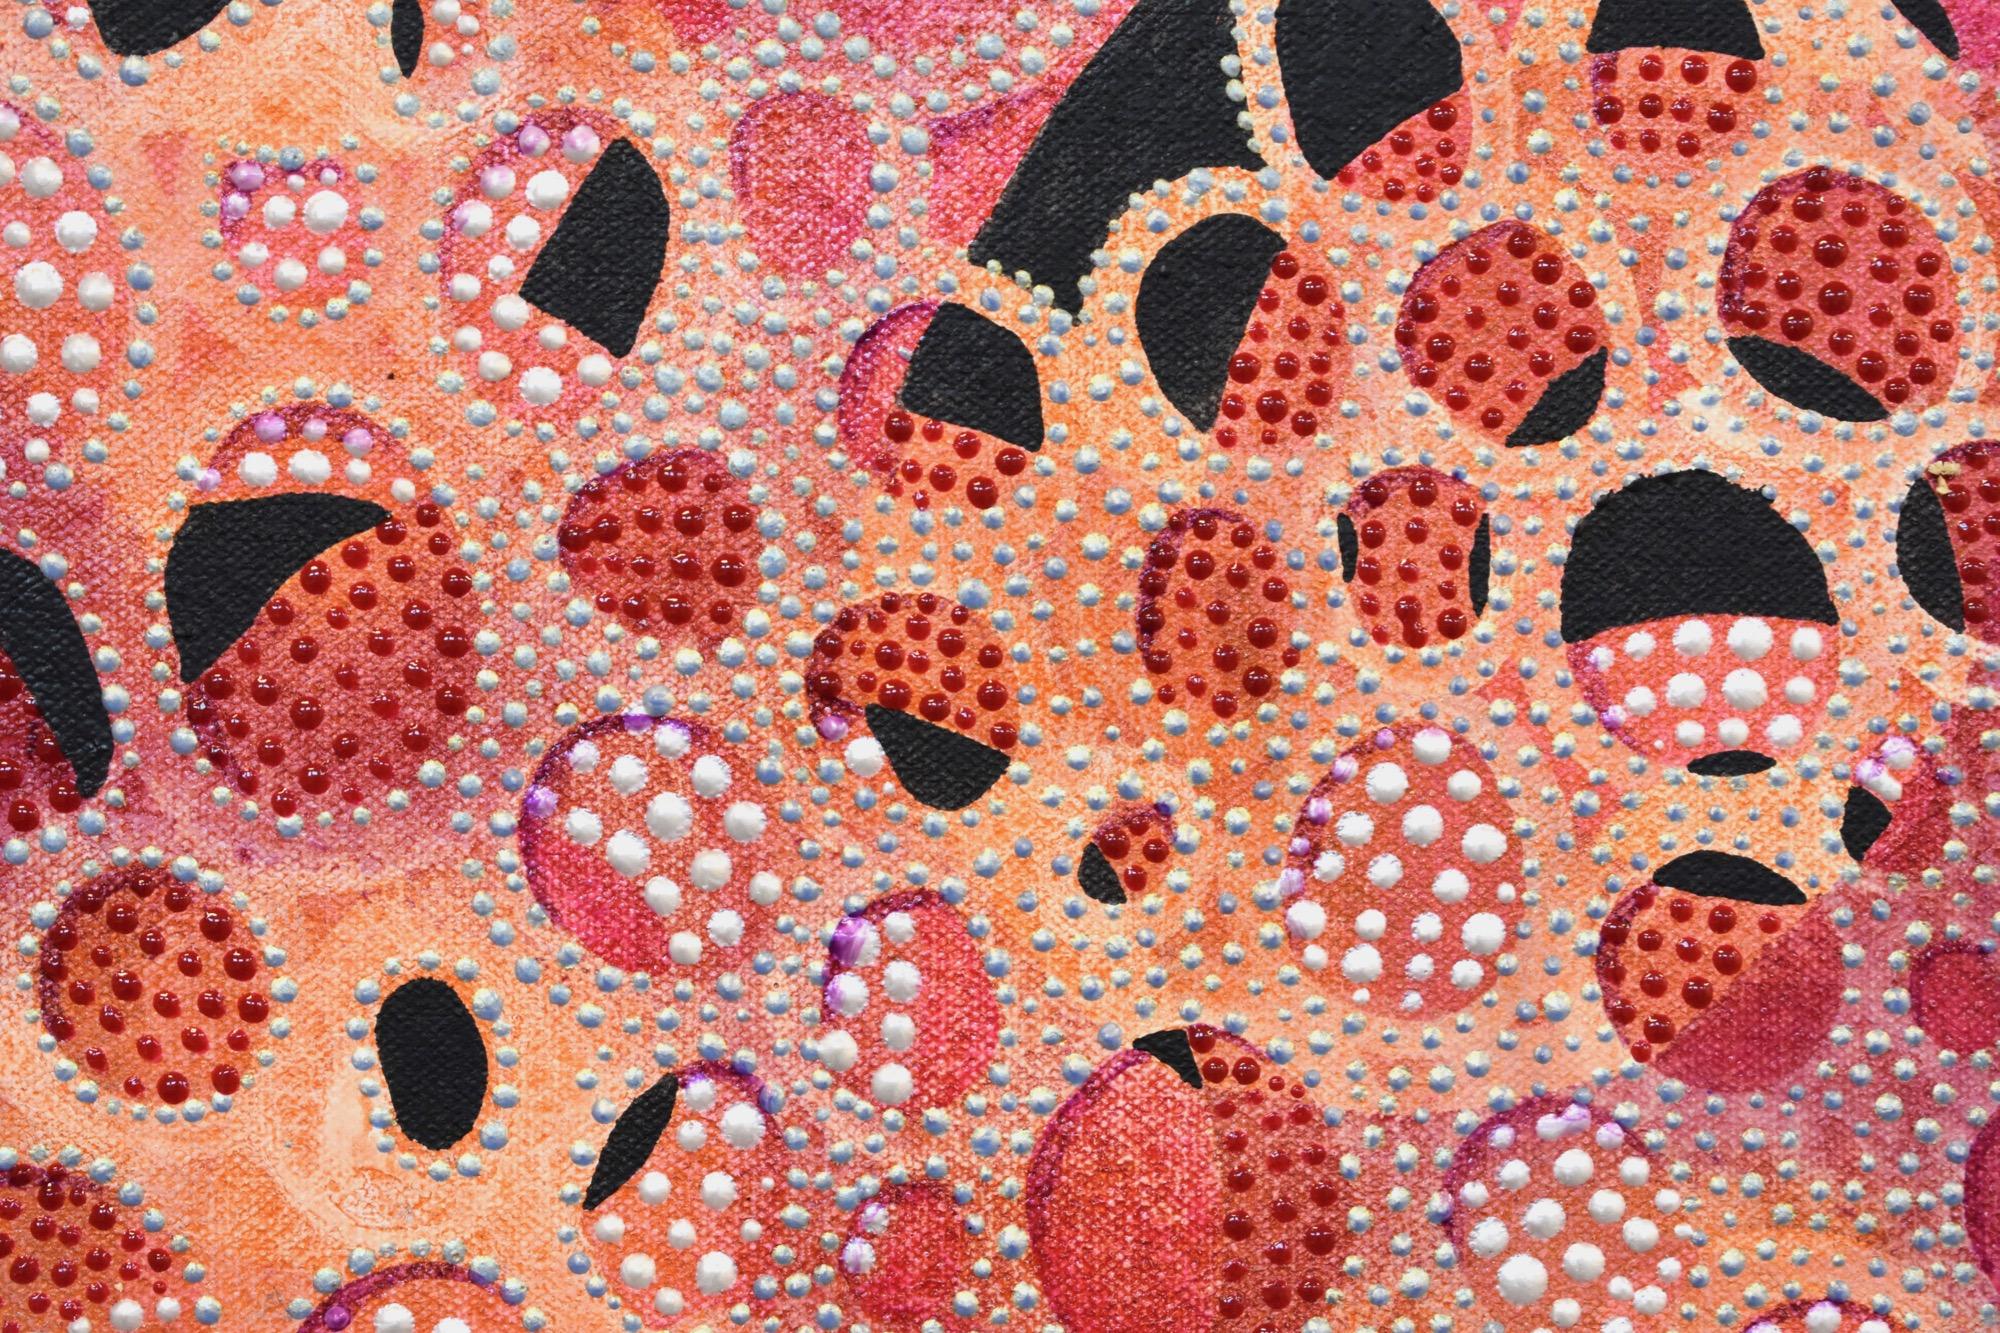 acrylic painting with dots